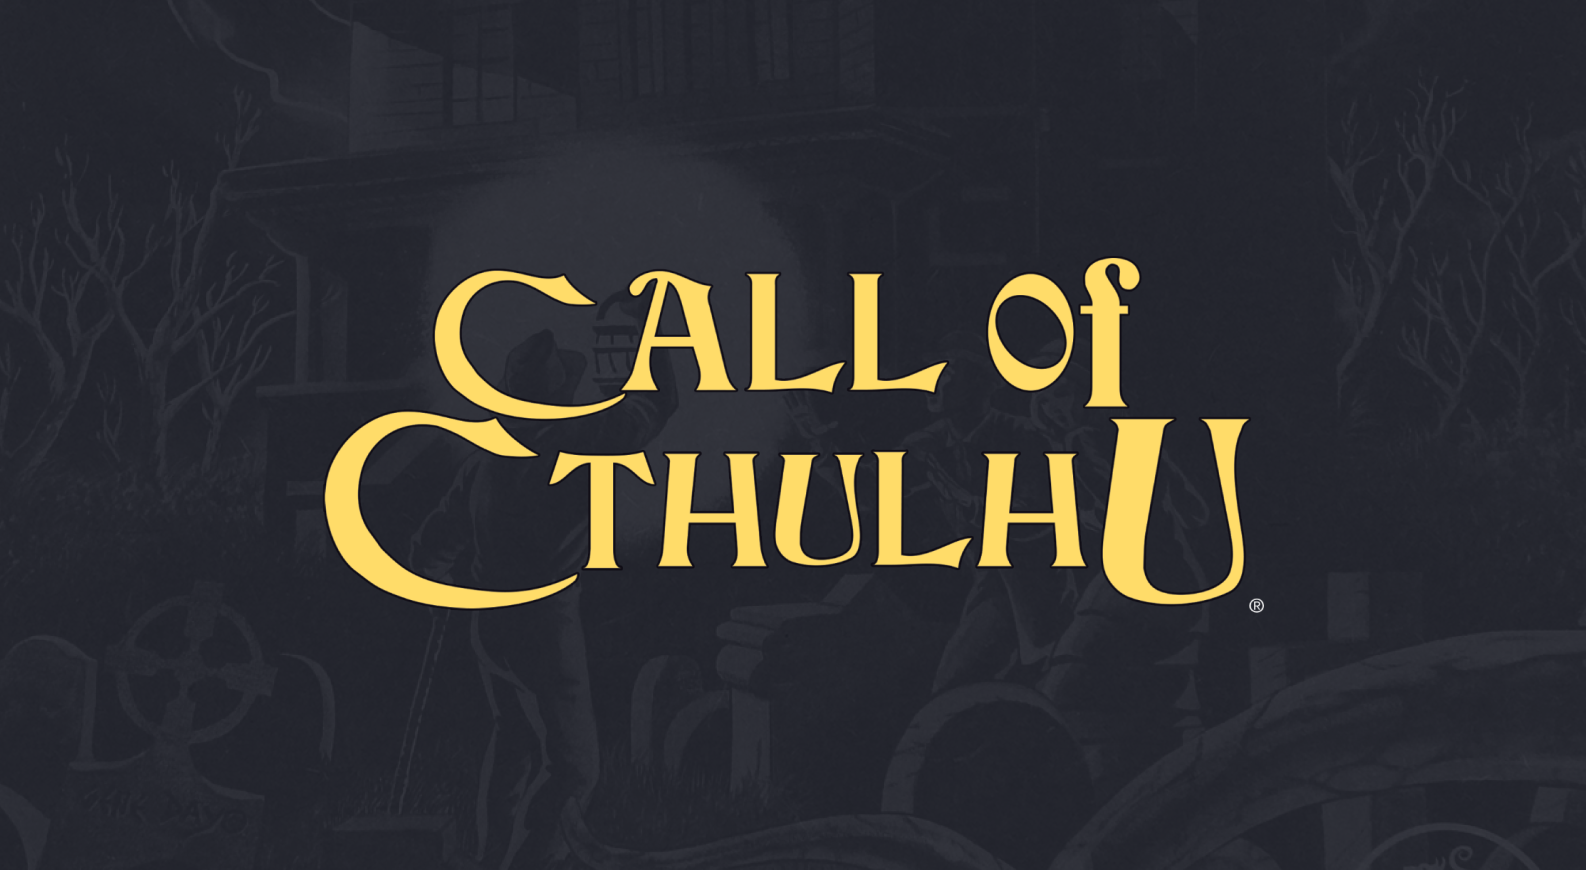 The Call of Cthulhu 7th edition tabletop roleplaying game